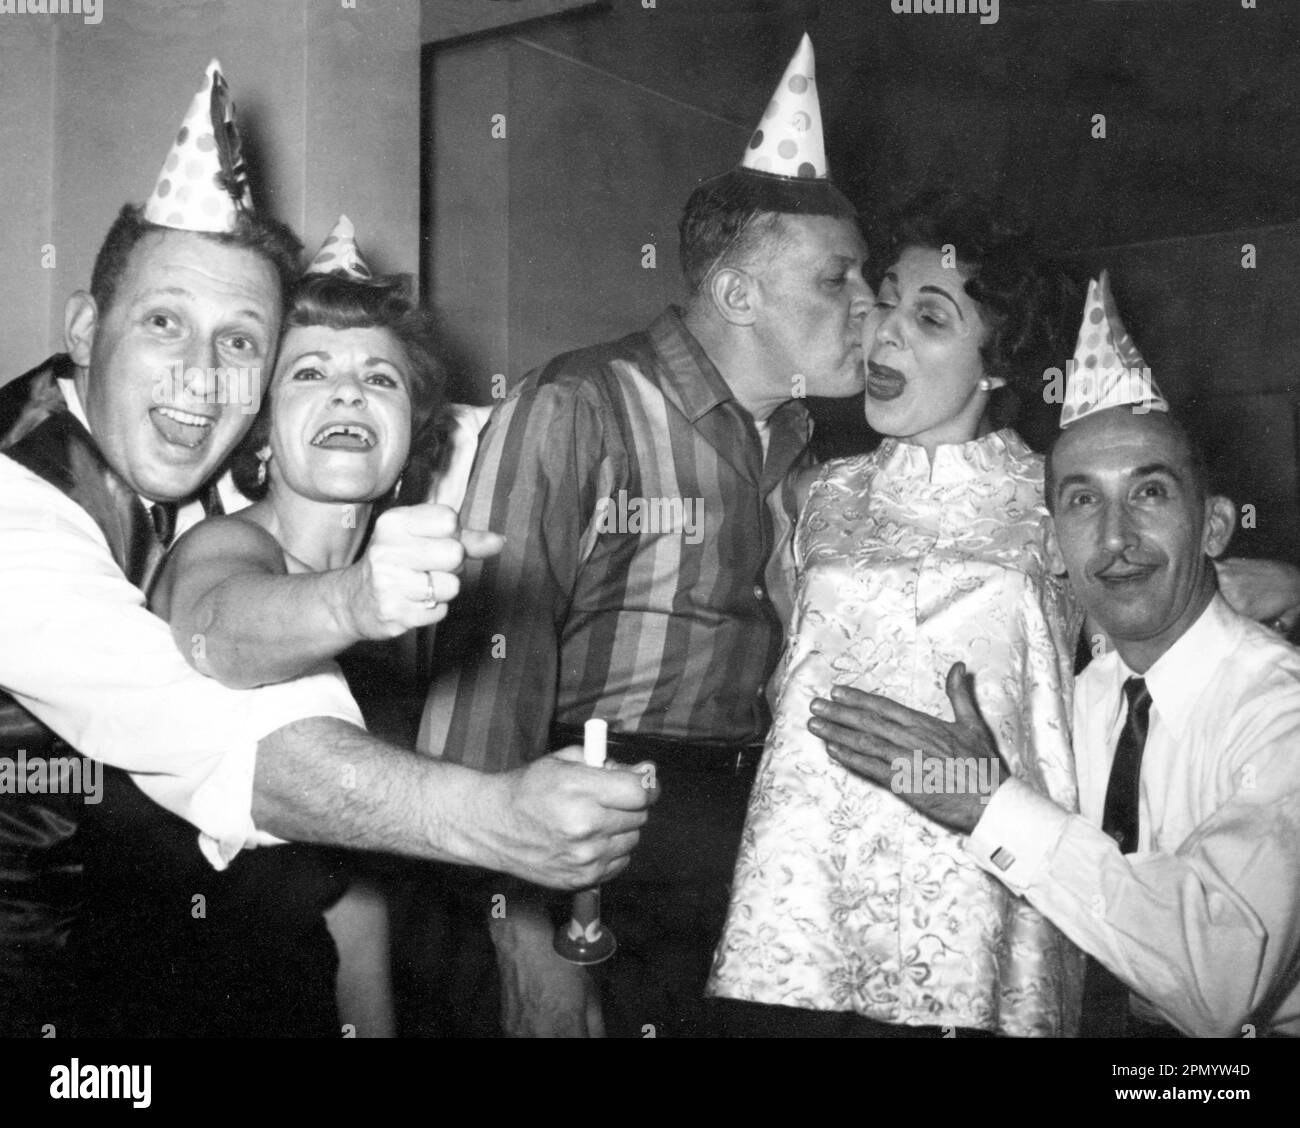 Circa 1960: Adults celebrating at home wearing party hats and holding noisemakers: New Year's Eve USA. 1 woman pregnant. Original black and white vintage photograph. Stock Photo